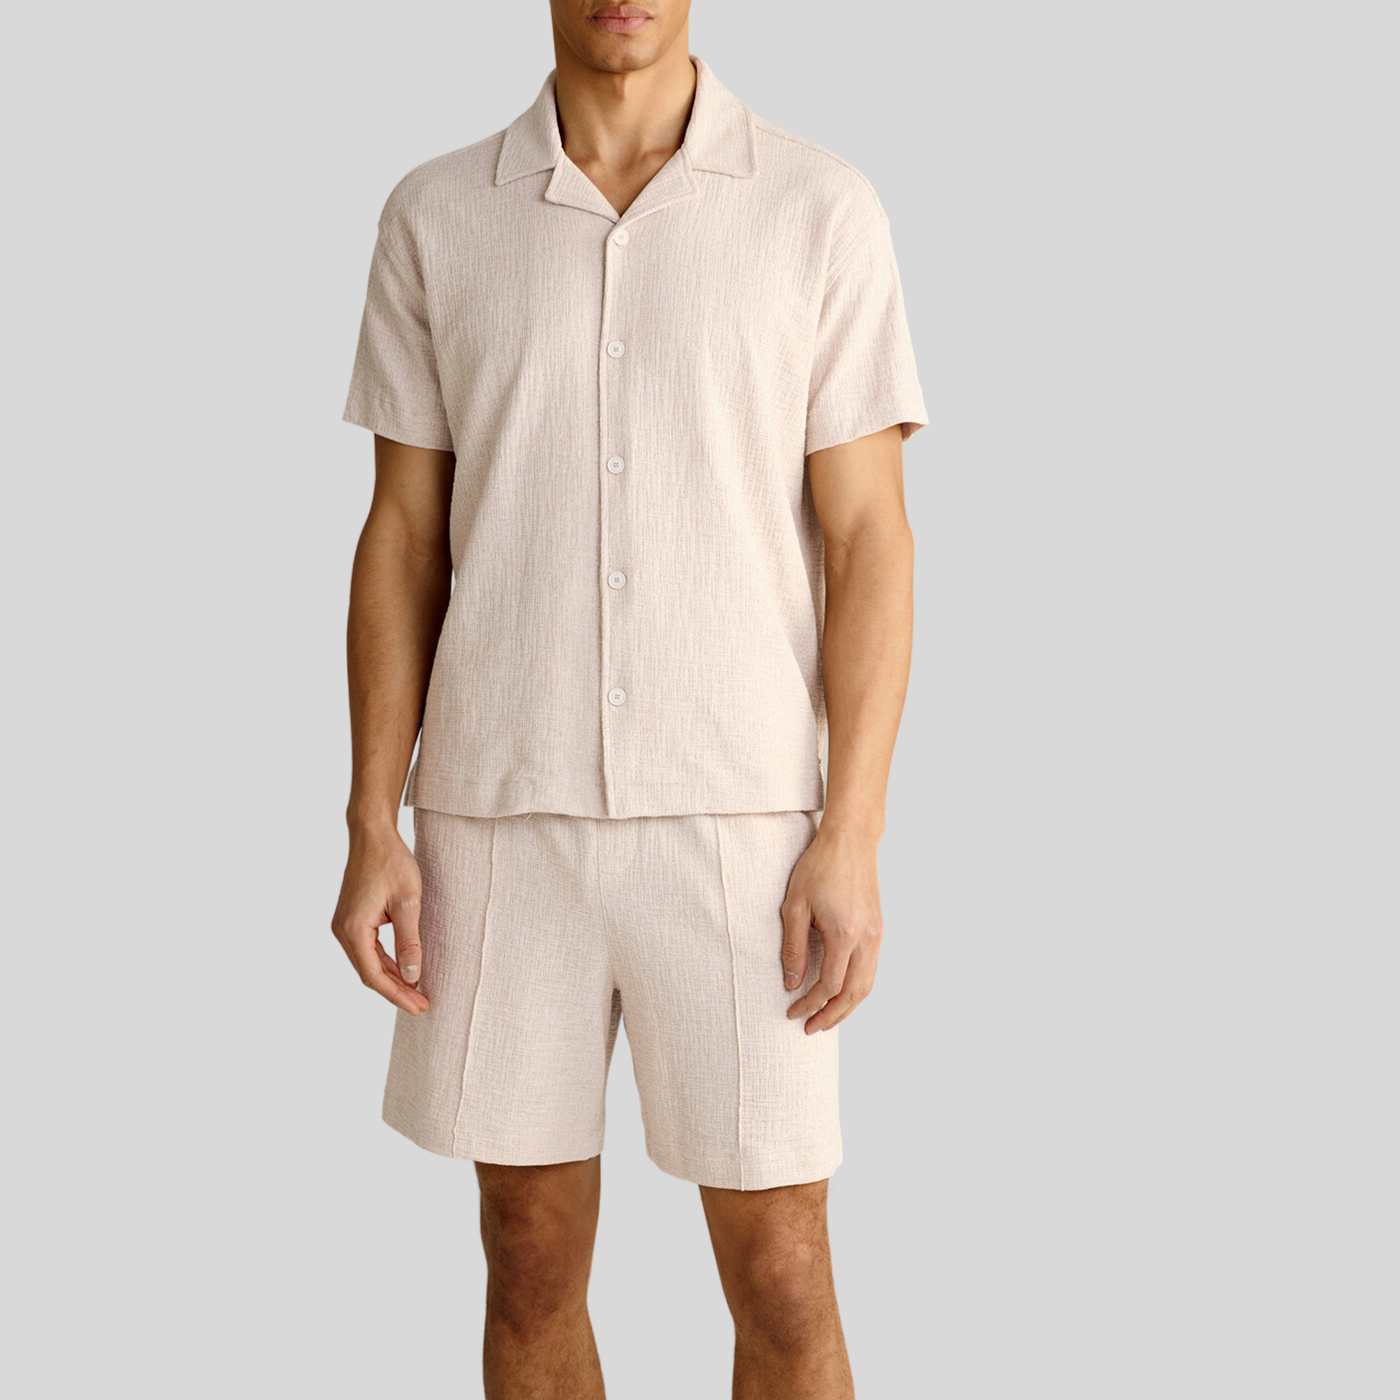 Gotstyle Fashion - Joop! Shorts Structured Shorts with Pintuck Details - Beige